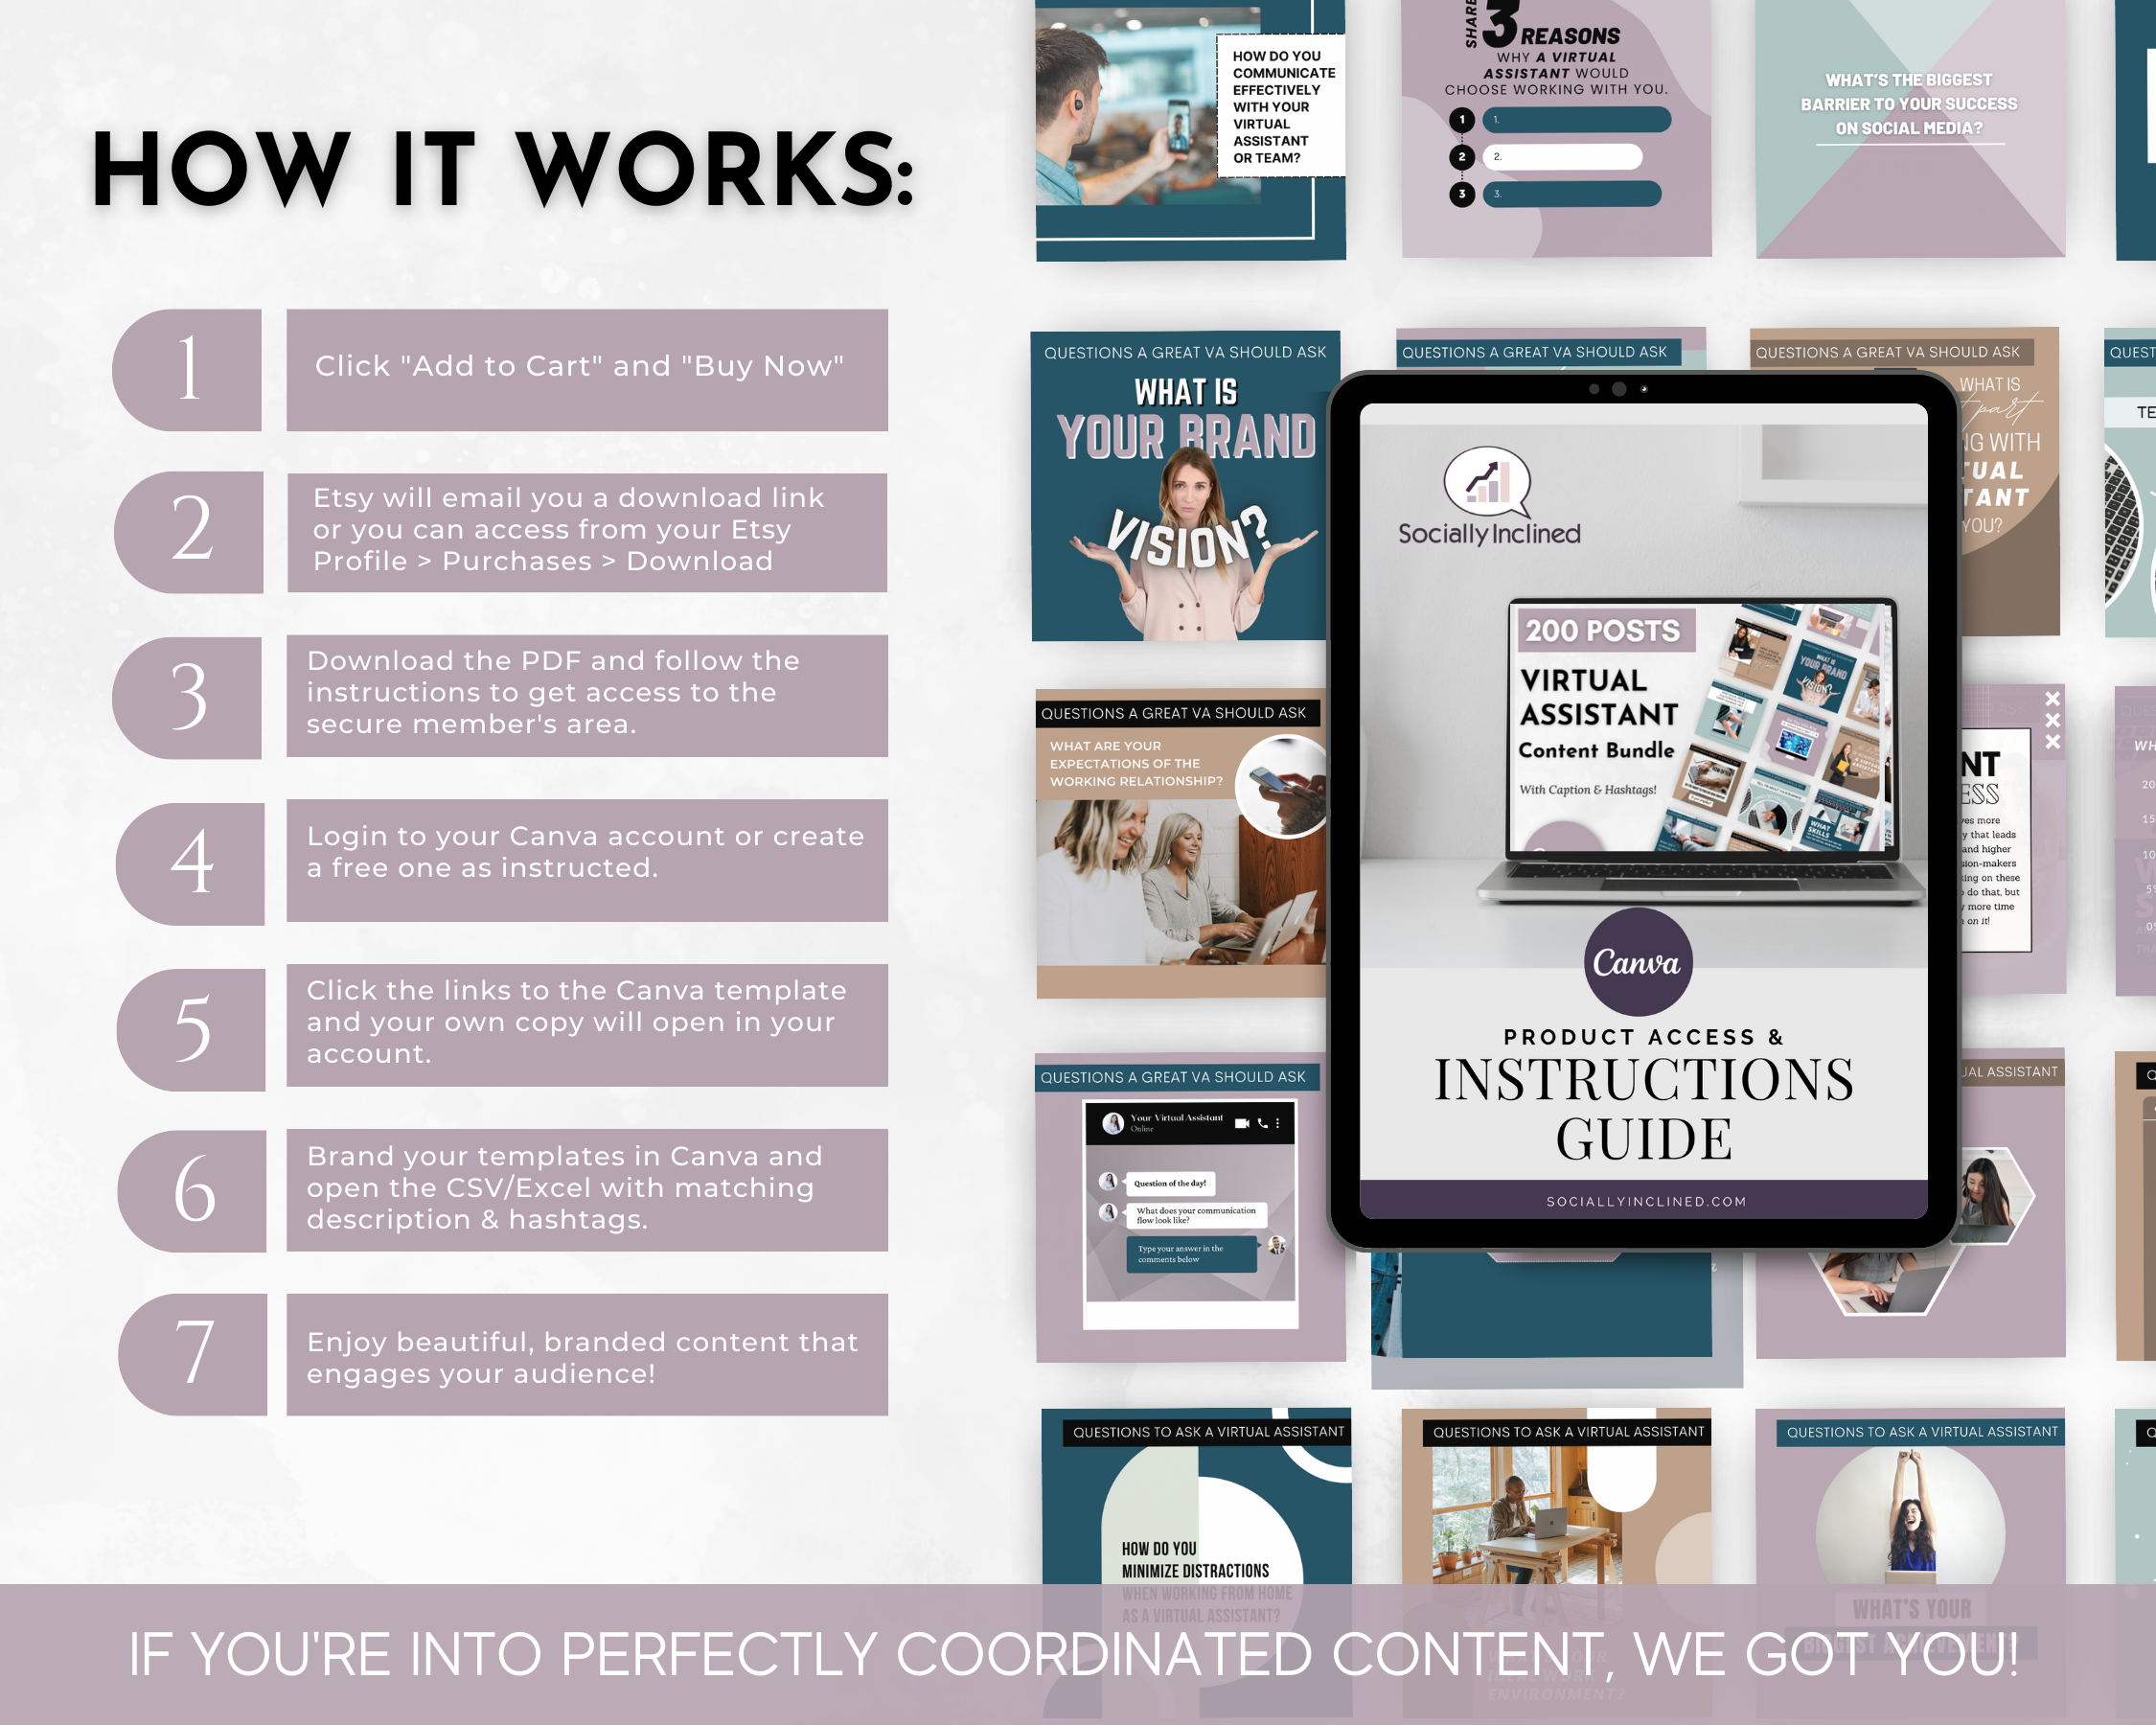 How to effectively use Socially Inclined's Virtual Assistant Social Media Post Bundle with Canva Templates.